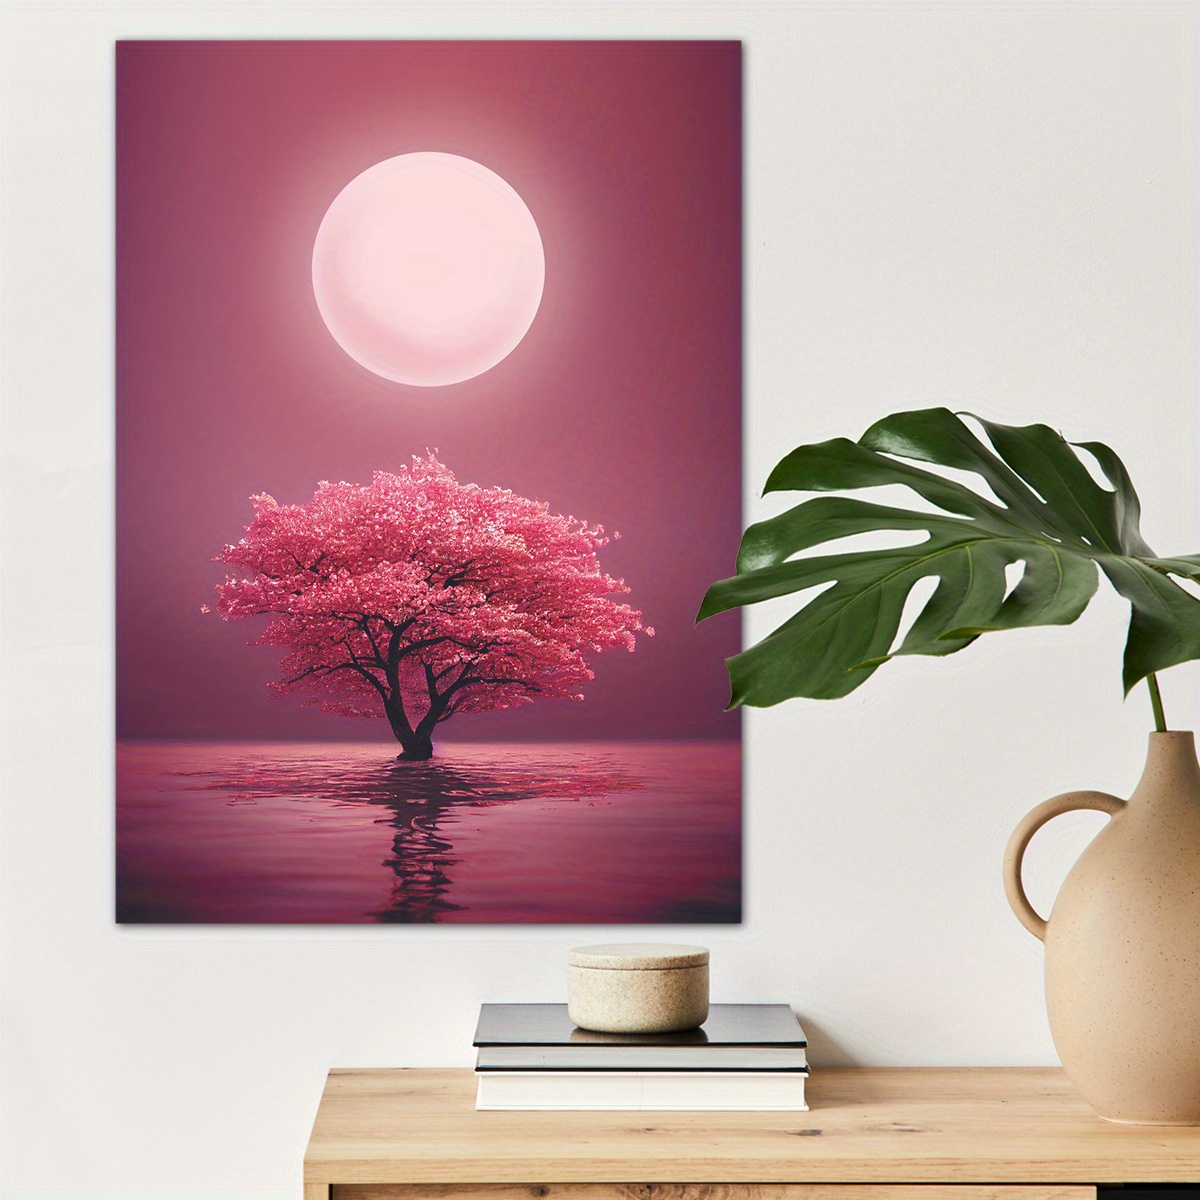 

1pc Cherry Tree Canvas Wall Art For Home Decor, High Quality Wall Decor, Canvas Prints For Living Room Bedroom Bathroom Kitchen Office Cafe Decor, Perfect Gift And Decoration